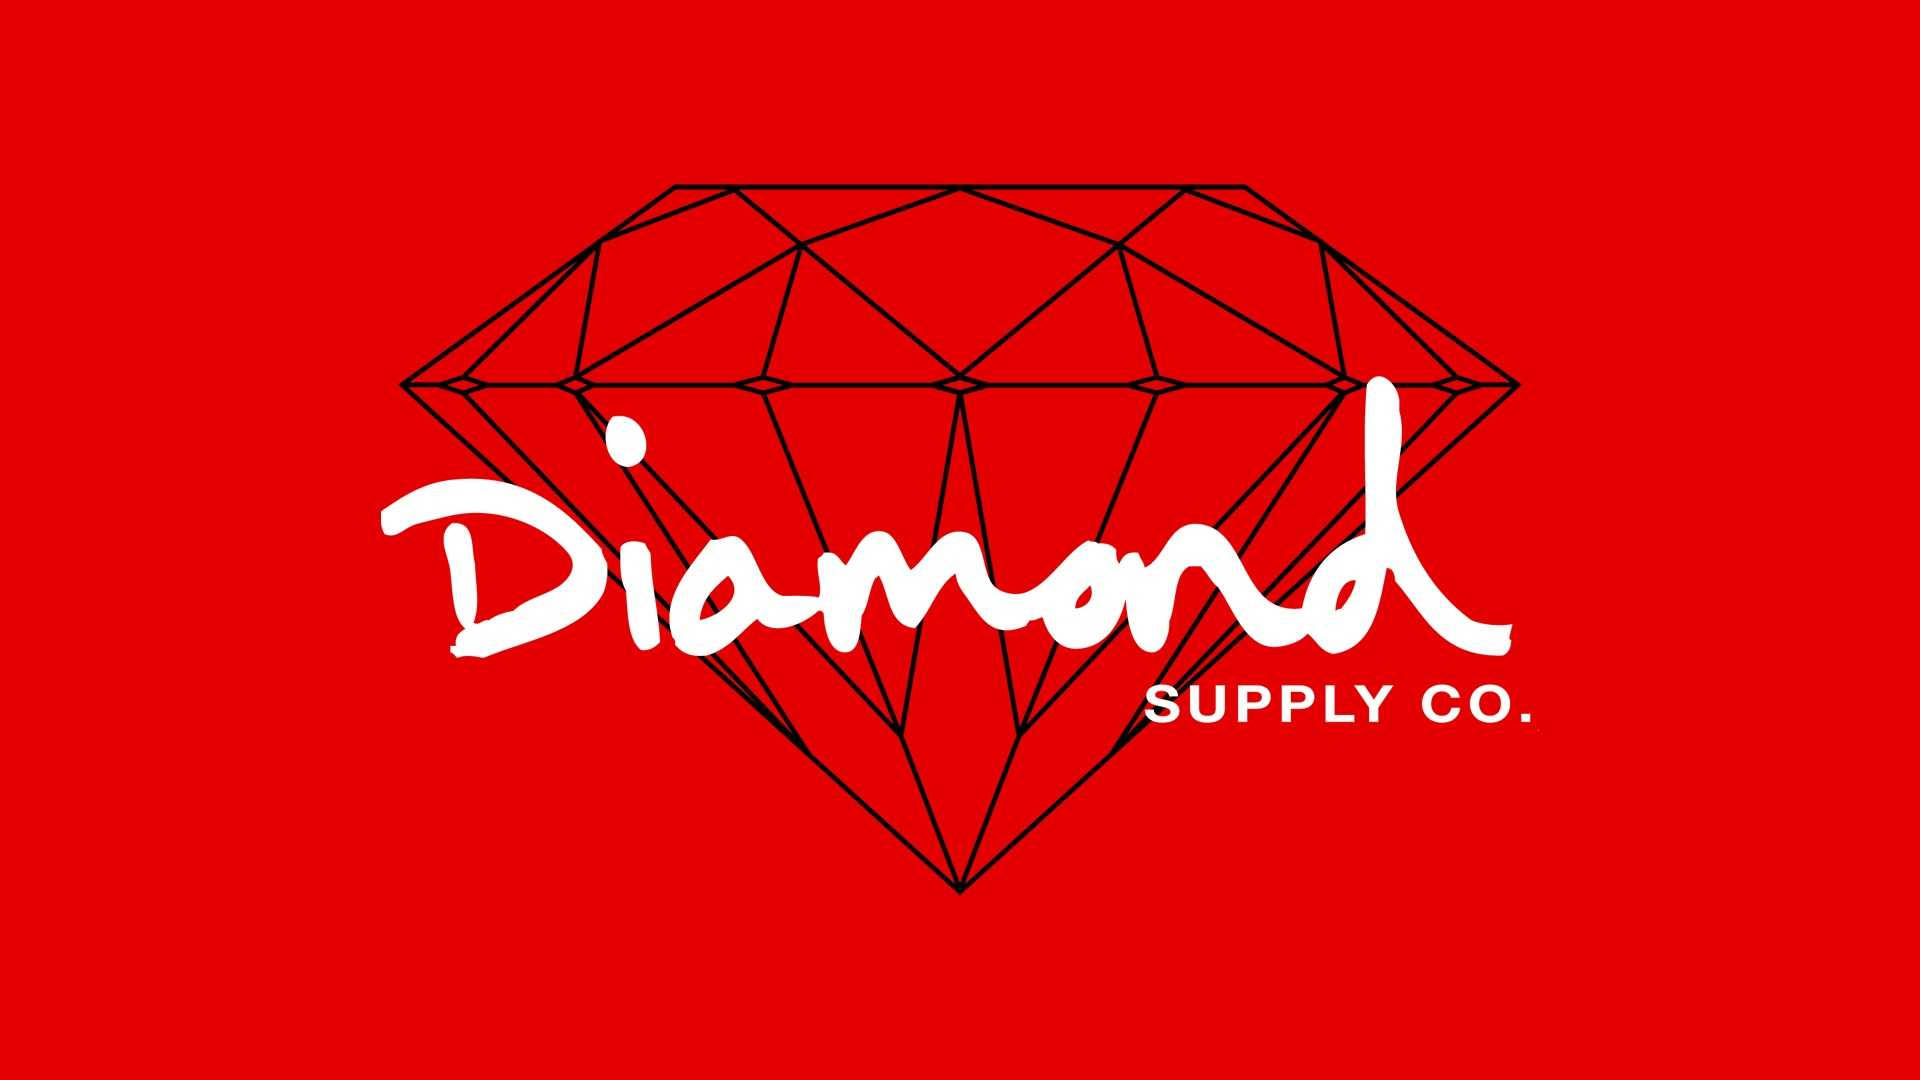 Diamond Supply Co Logo In Red